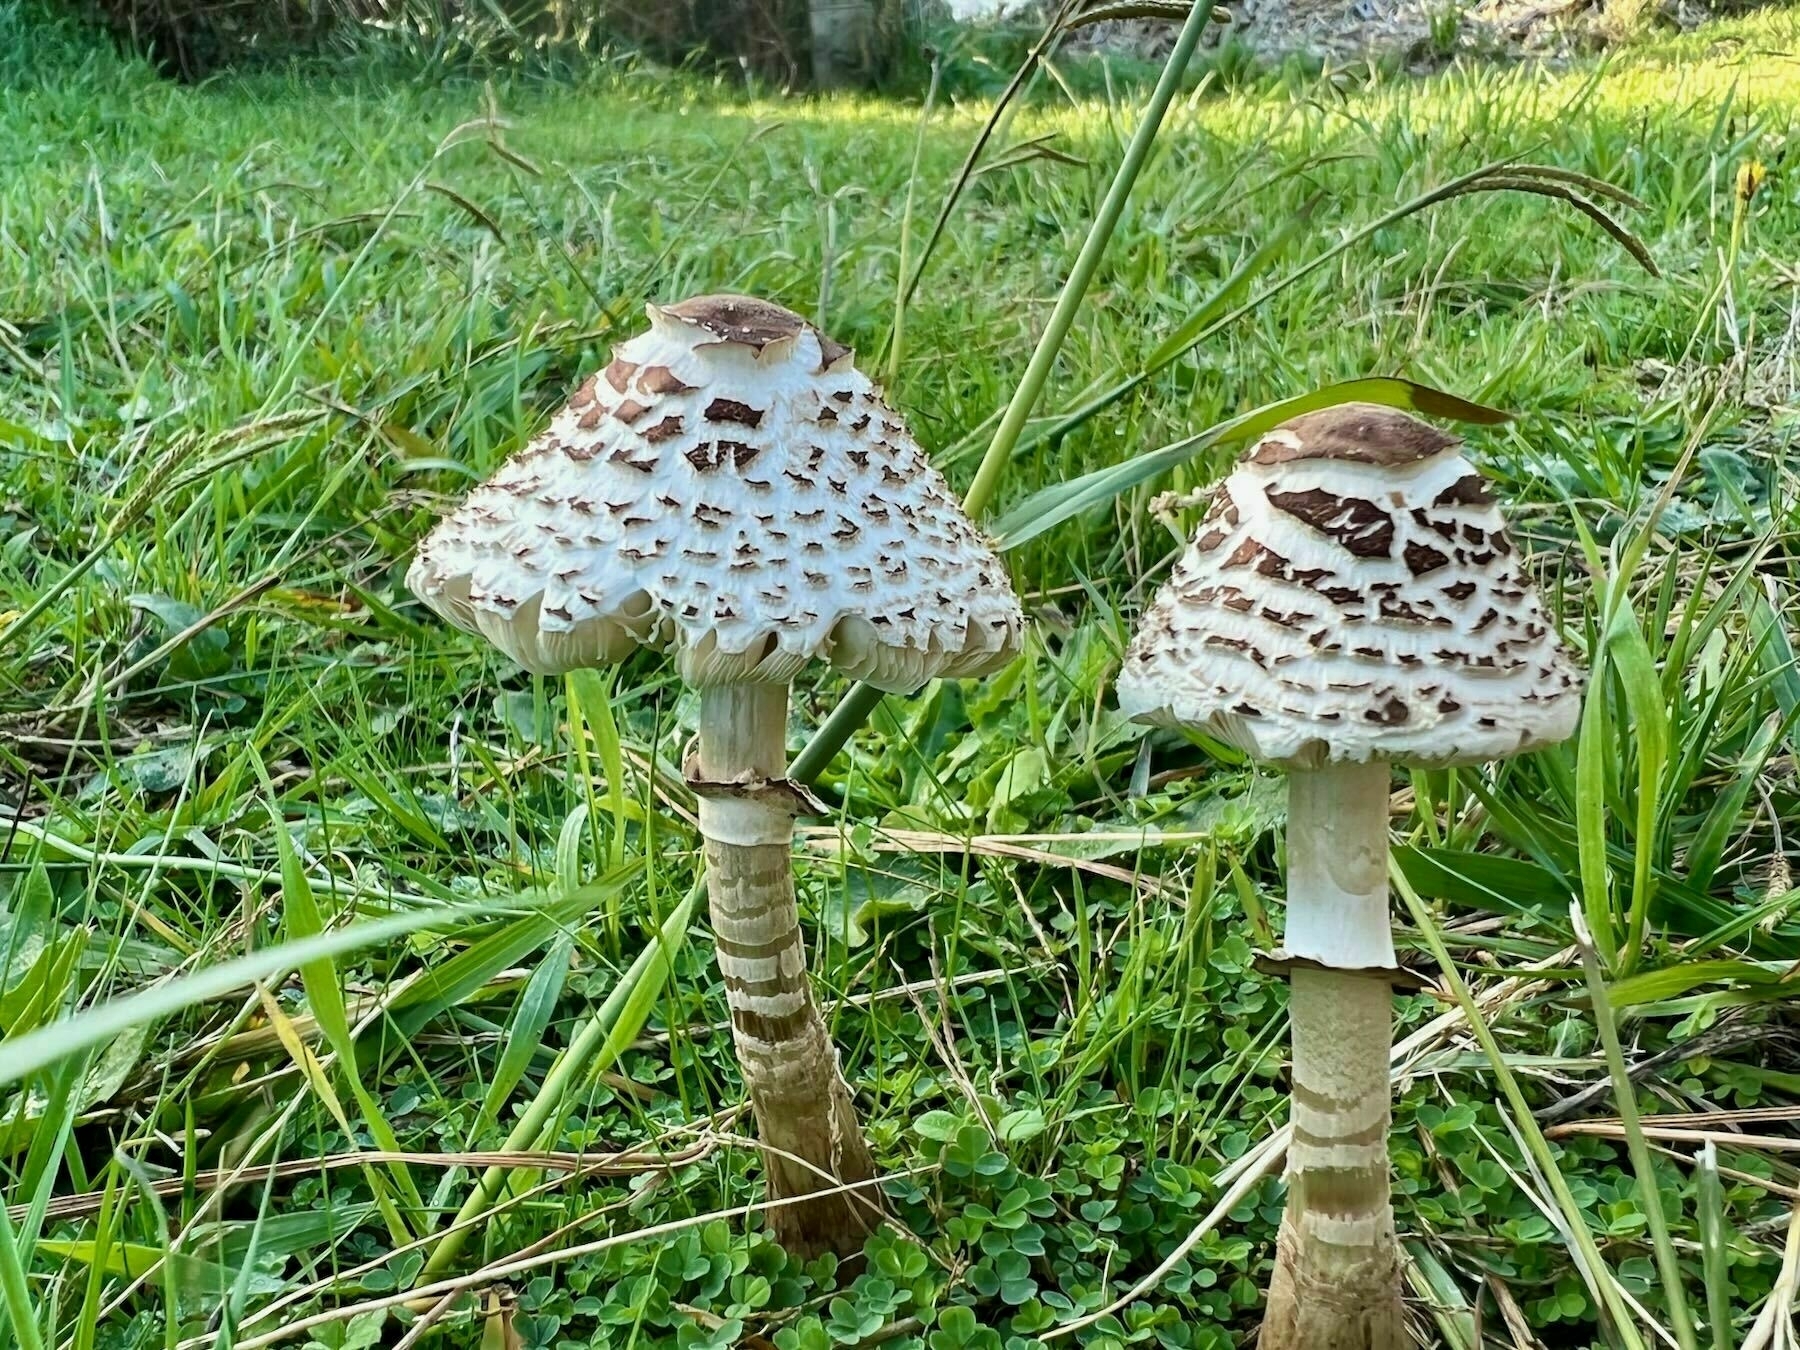 Two white fungi with brown mottling and a partially open parasol shape, in grass. 